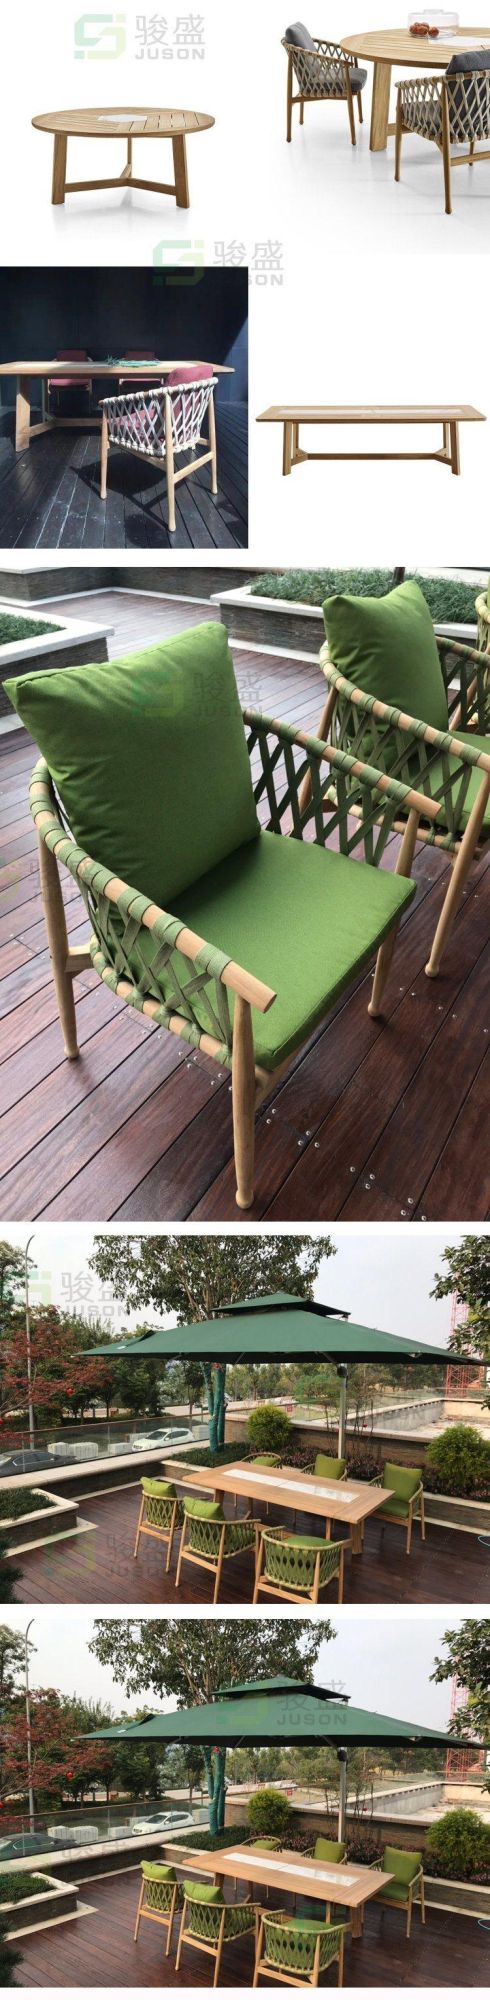 Dining Chair and Table Garden Furniture